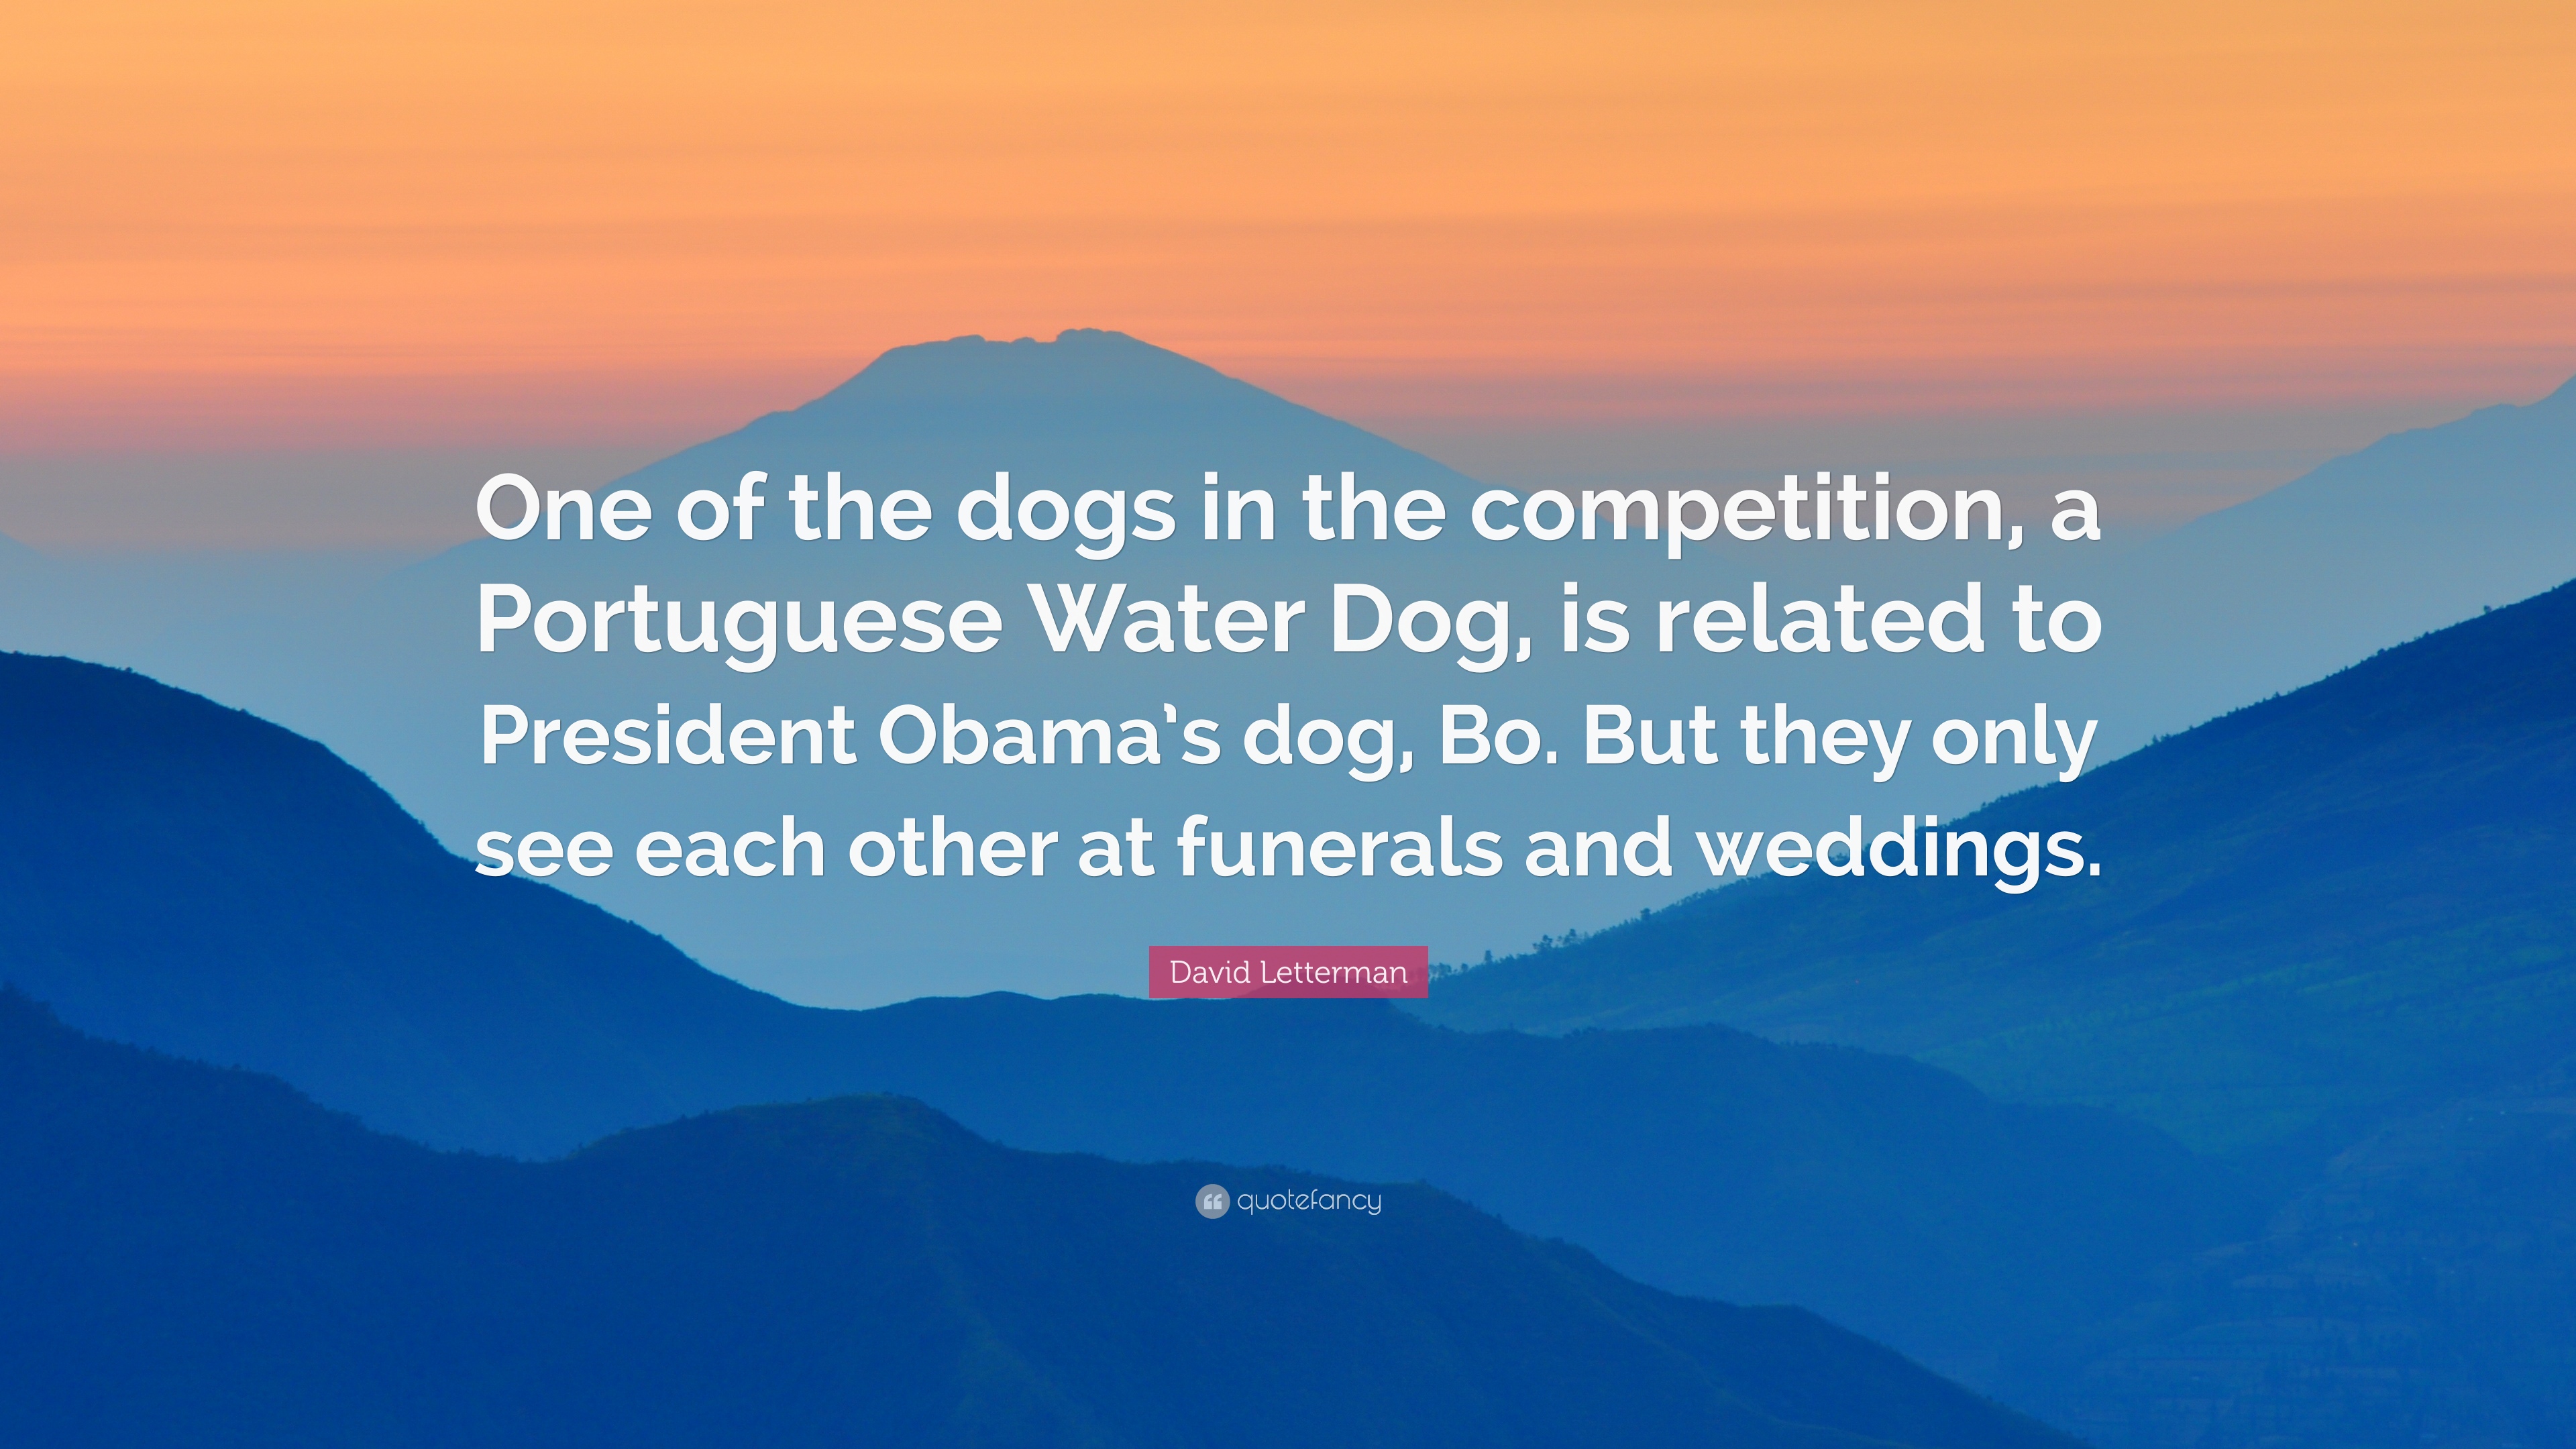 David Letterman Quote: “One of the dogs in the competition, a